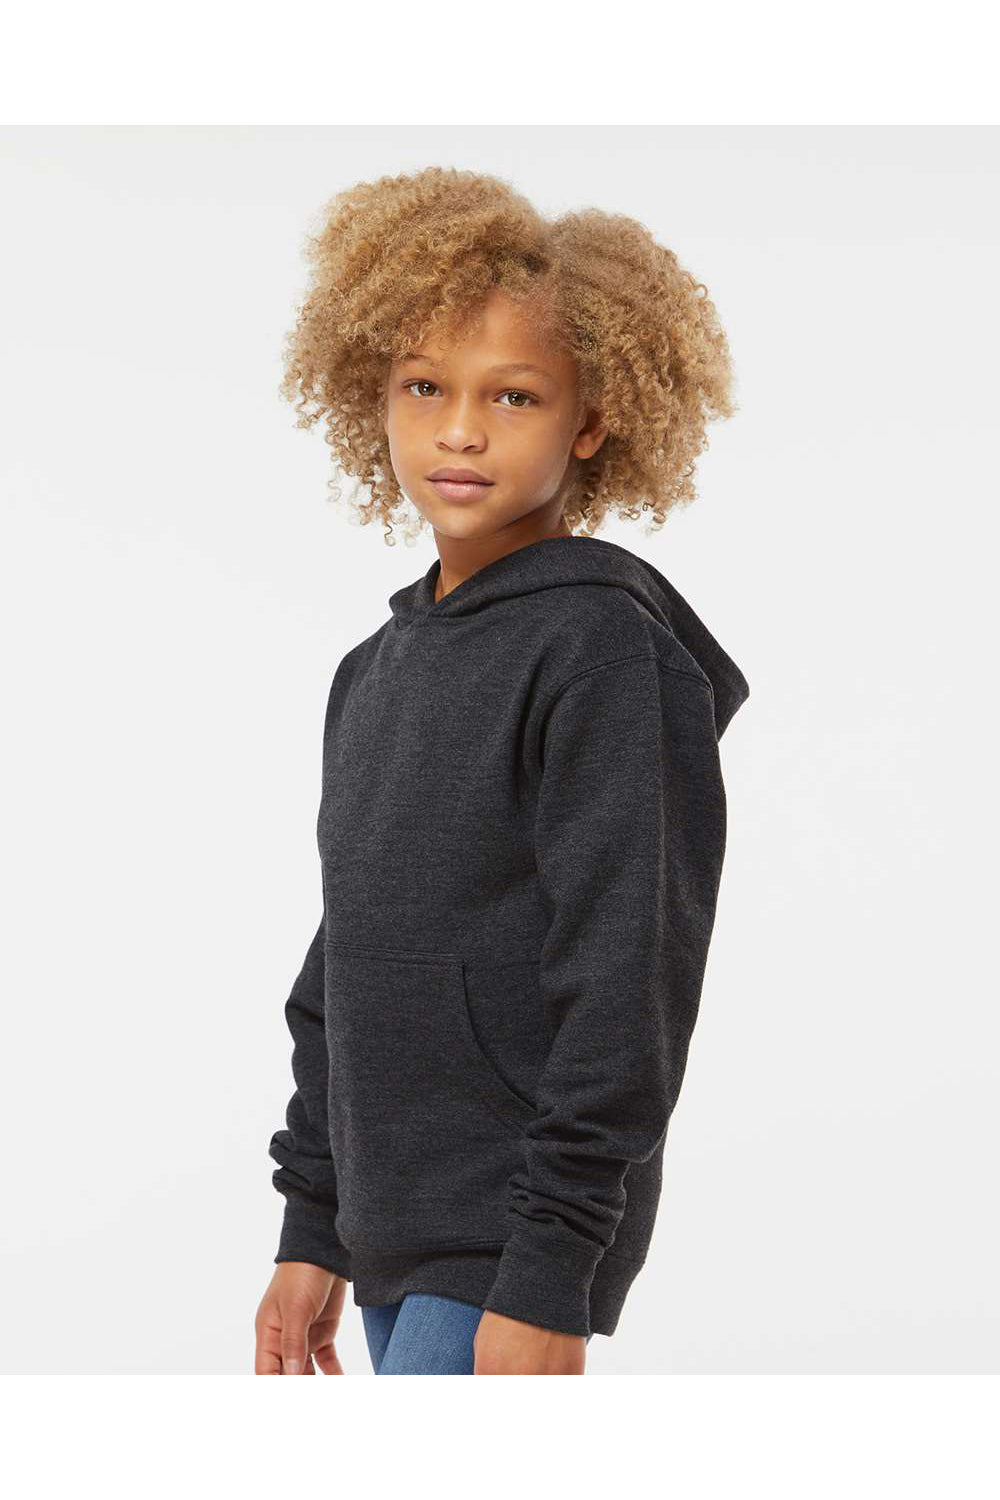 Independent Trading Co. SS4001Y Youth Hooded Sweatshirt Hoodie Heather Charcoal Grey Model Side